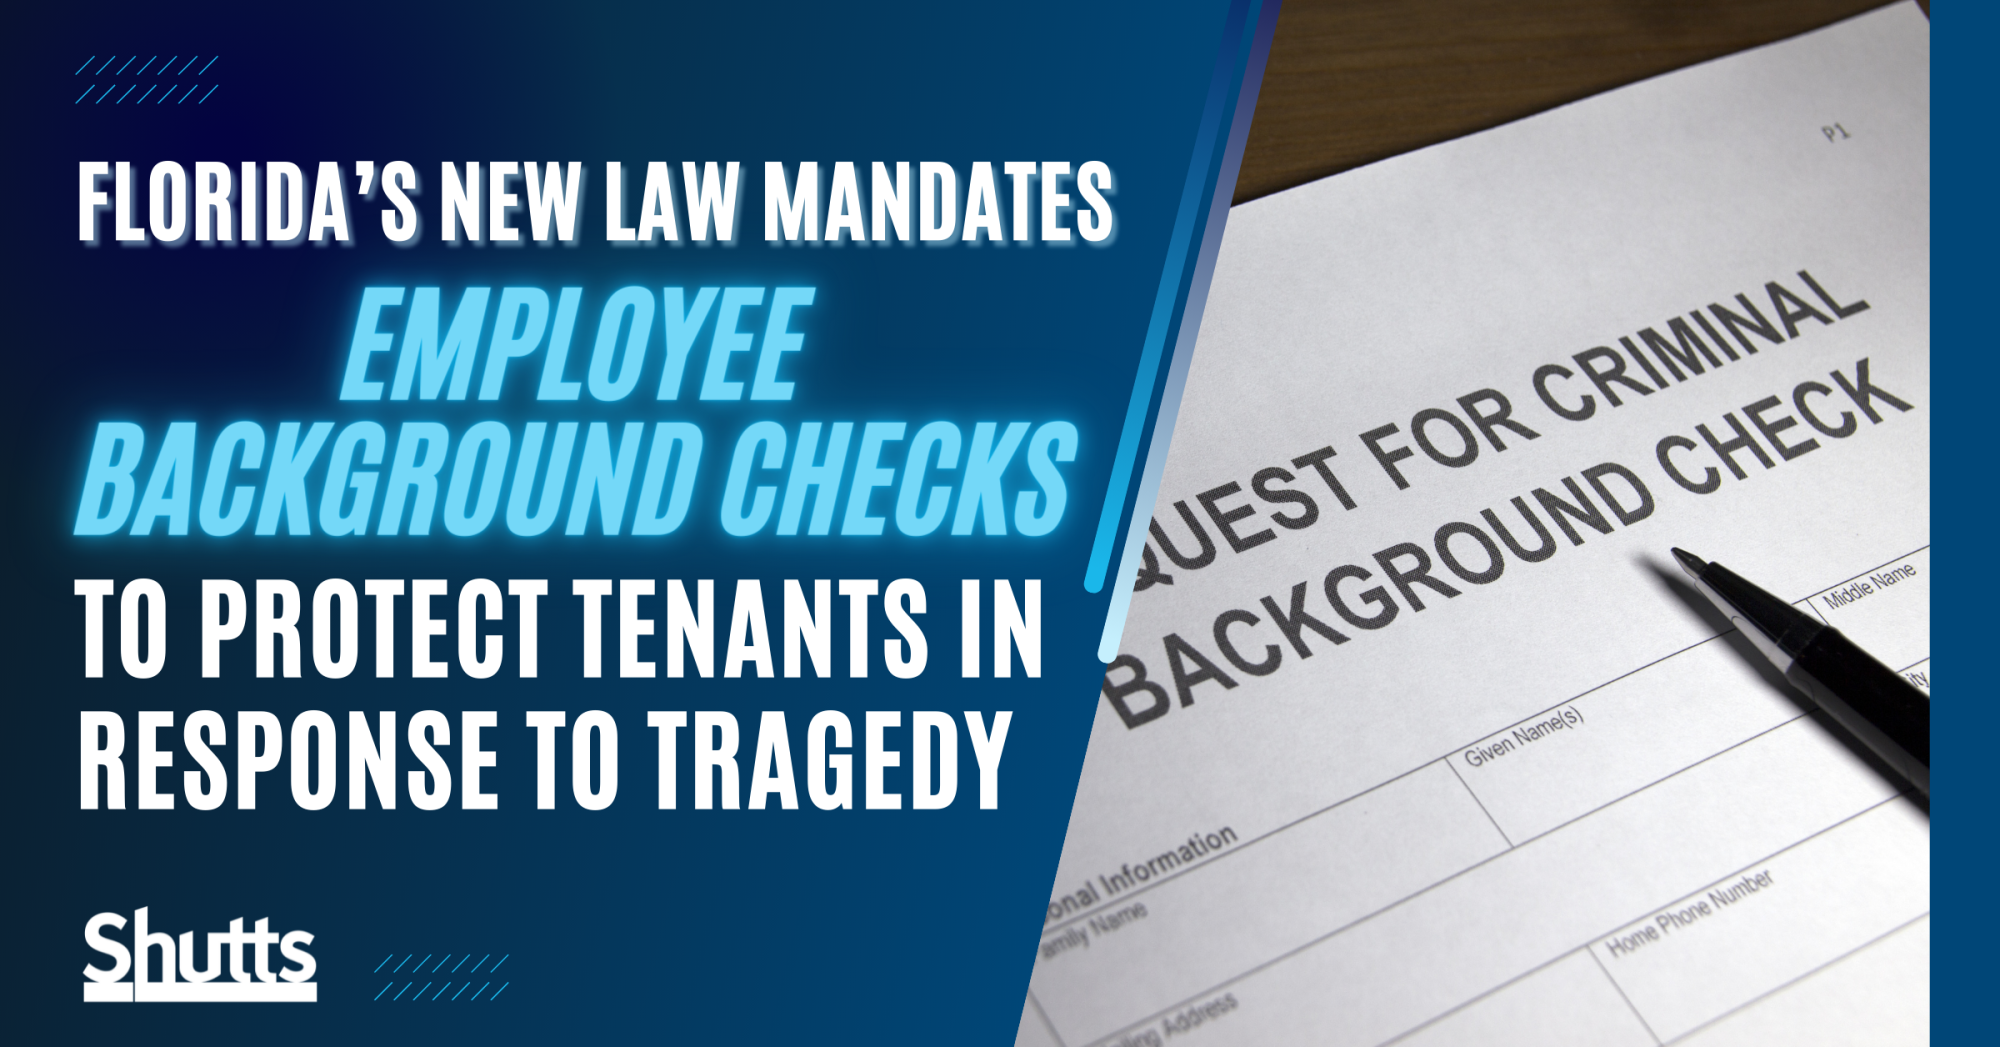 Florida’s New Law Mandates Employee Background Checks to Protect Tenants in Response to Tragedy